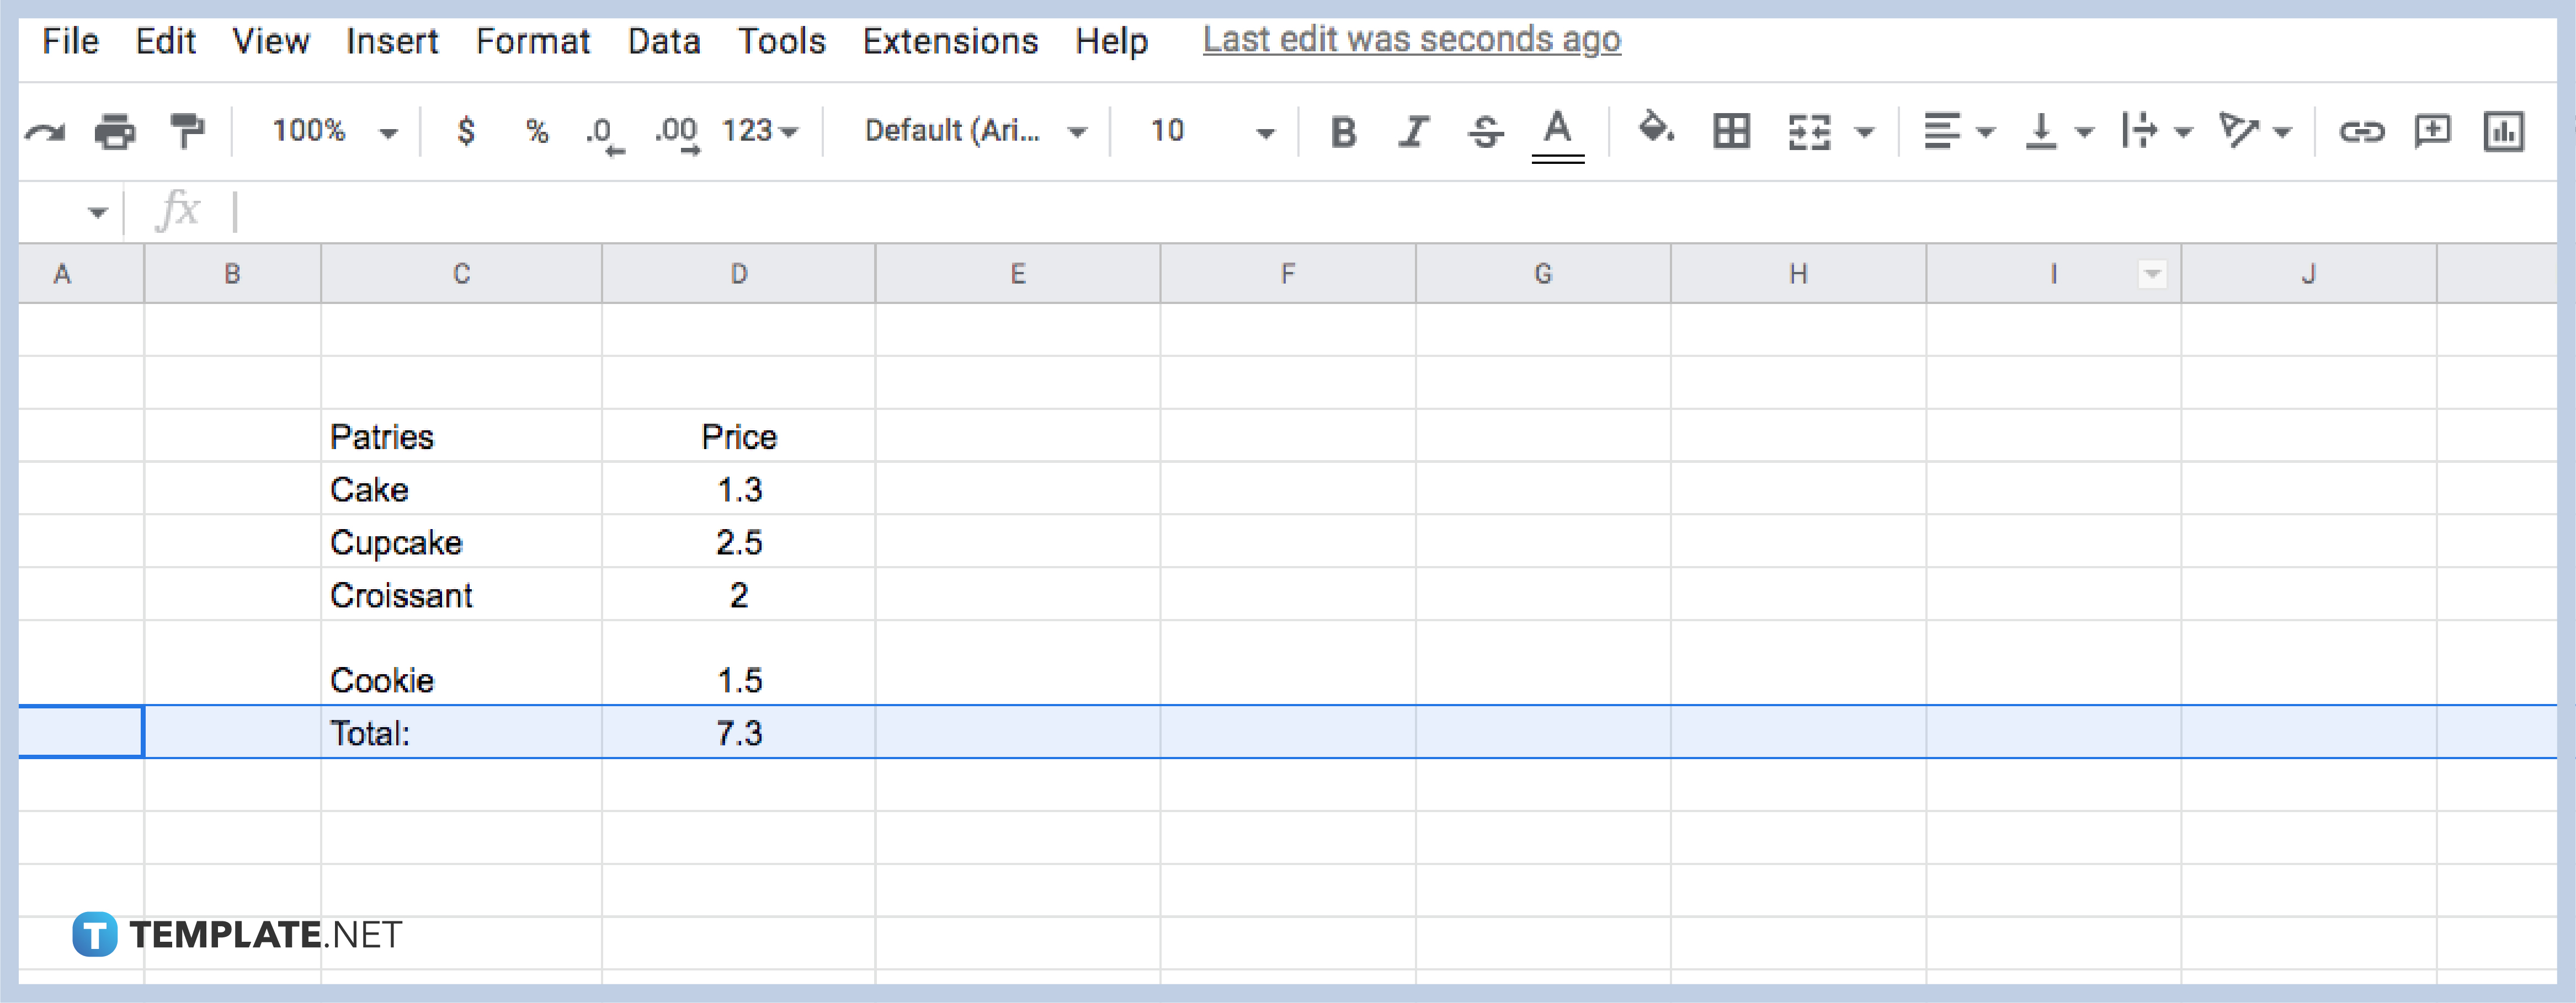 how-to-move-a-row-up-and-down-in-google-sheets-step-5